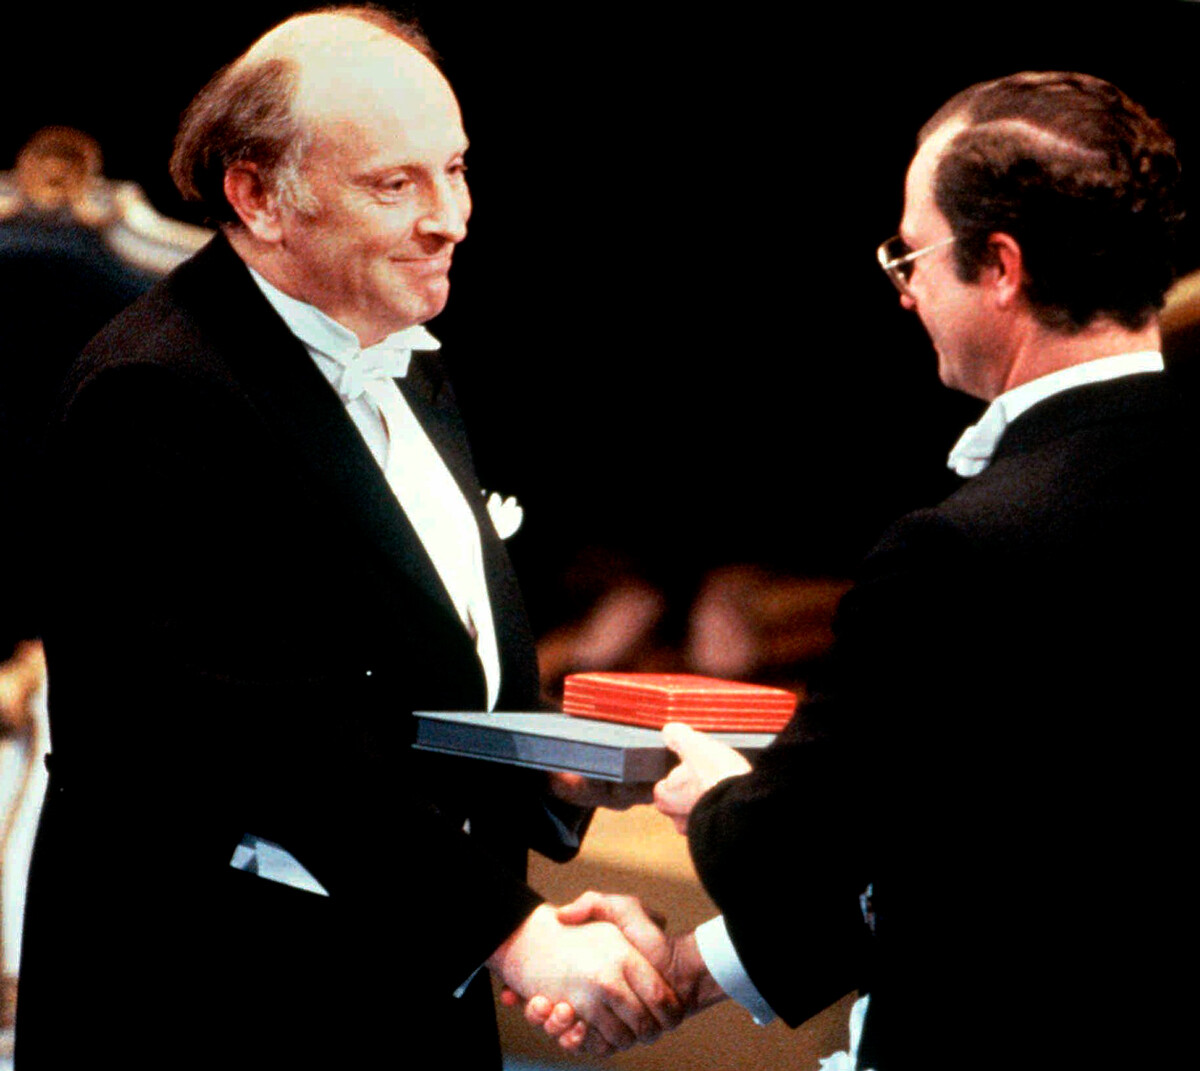 Nobel Prize-winning poet Joseph Brodsky is shown in this December 10, 1987 file photo as he receives the prize from Swedish King Carl XVI Gustaf at the Nobel ceremony in Stockholm.